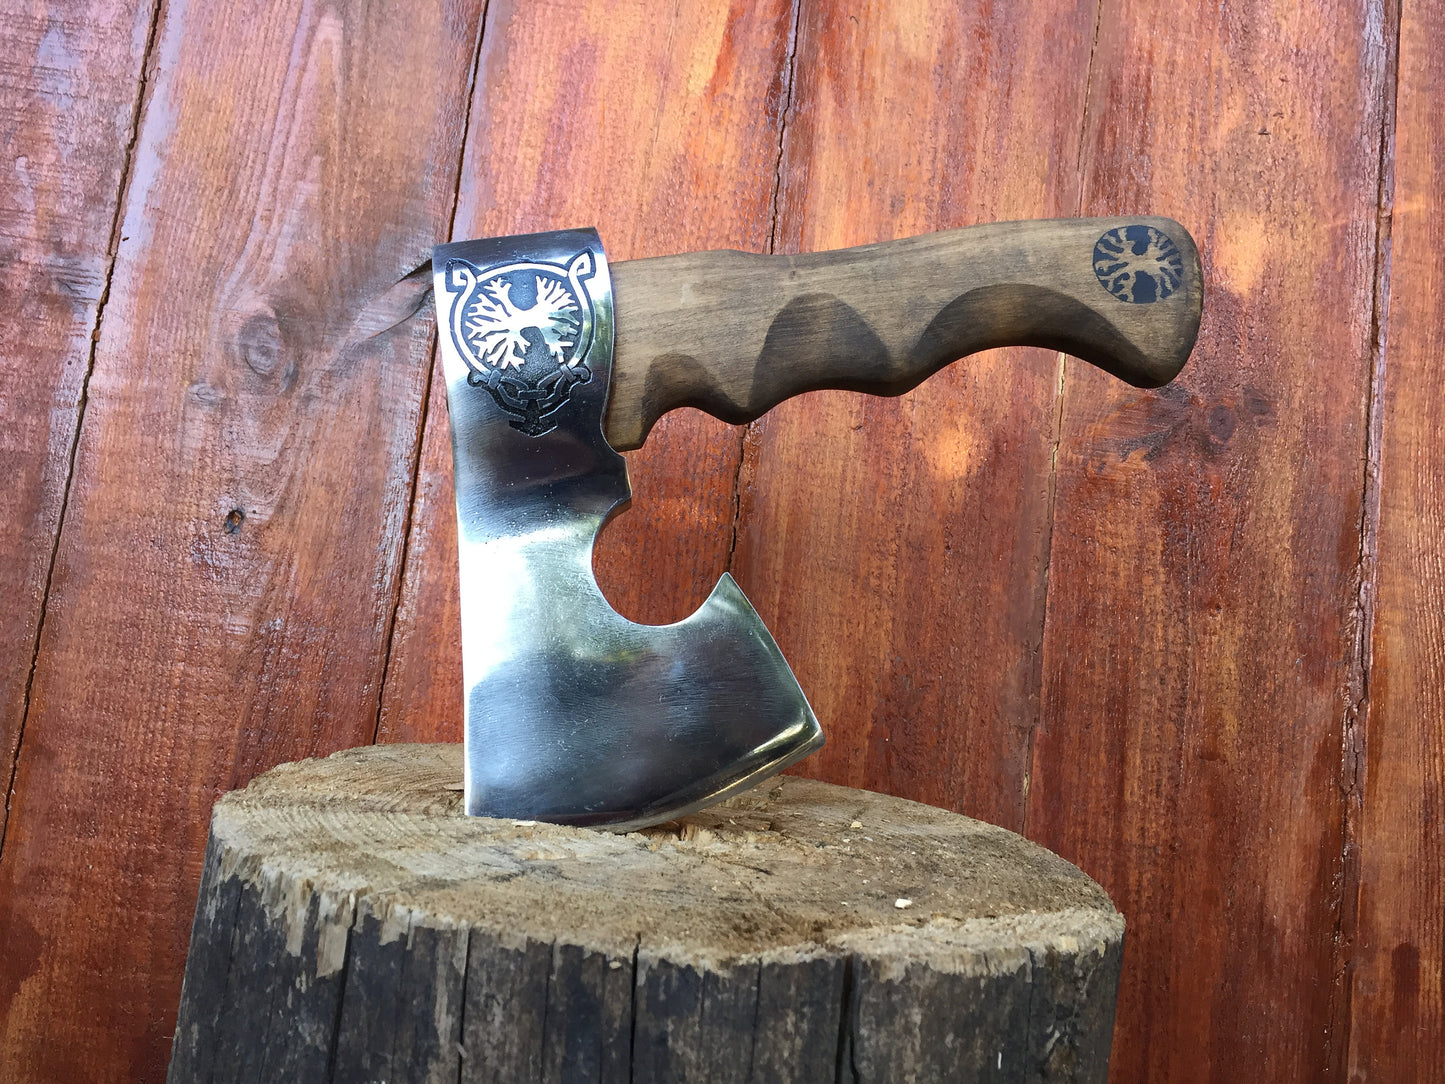 6th anniversary gift for him, iron gift for him, 11th anniversary gift for him, viking axe, tree of life, axe, mens gifts, gifts for men,axe